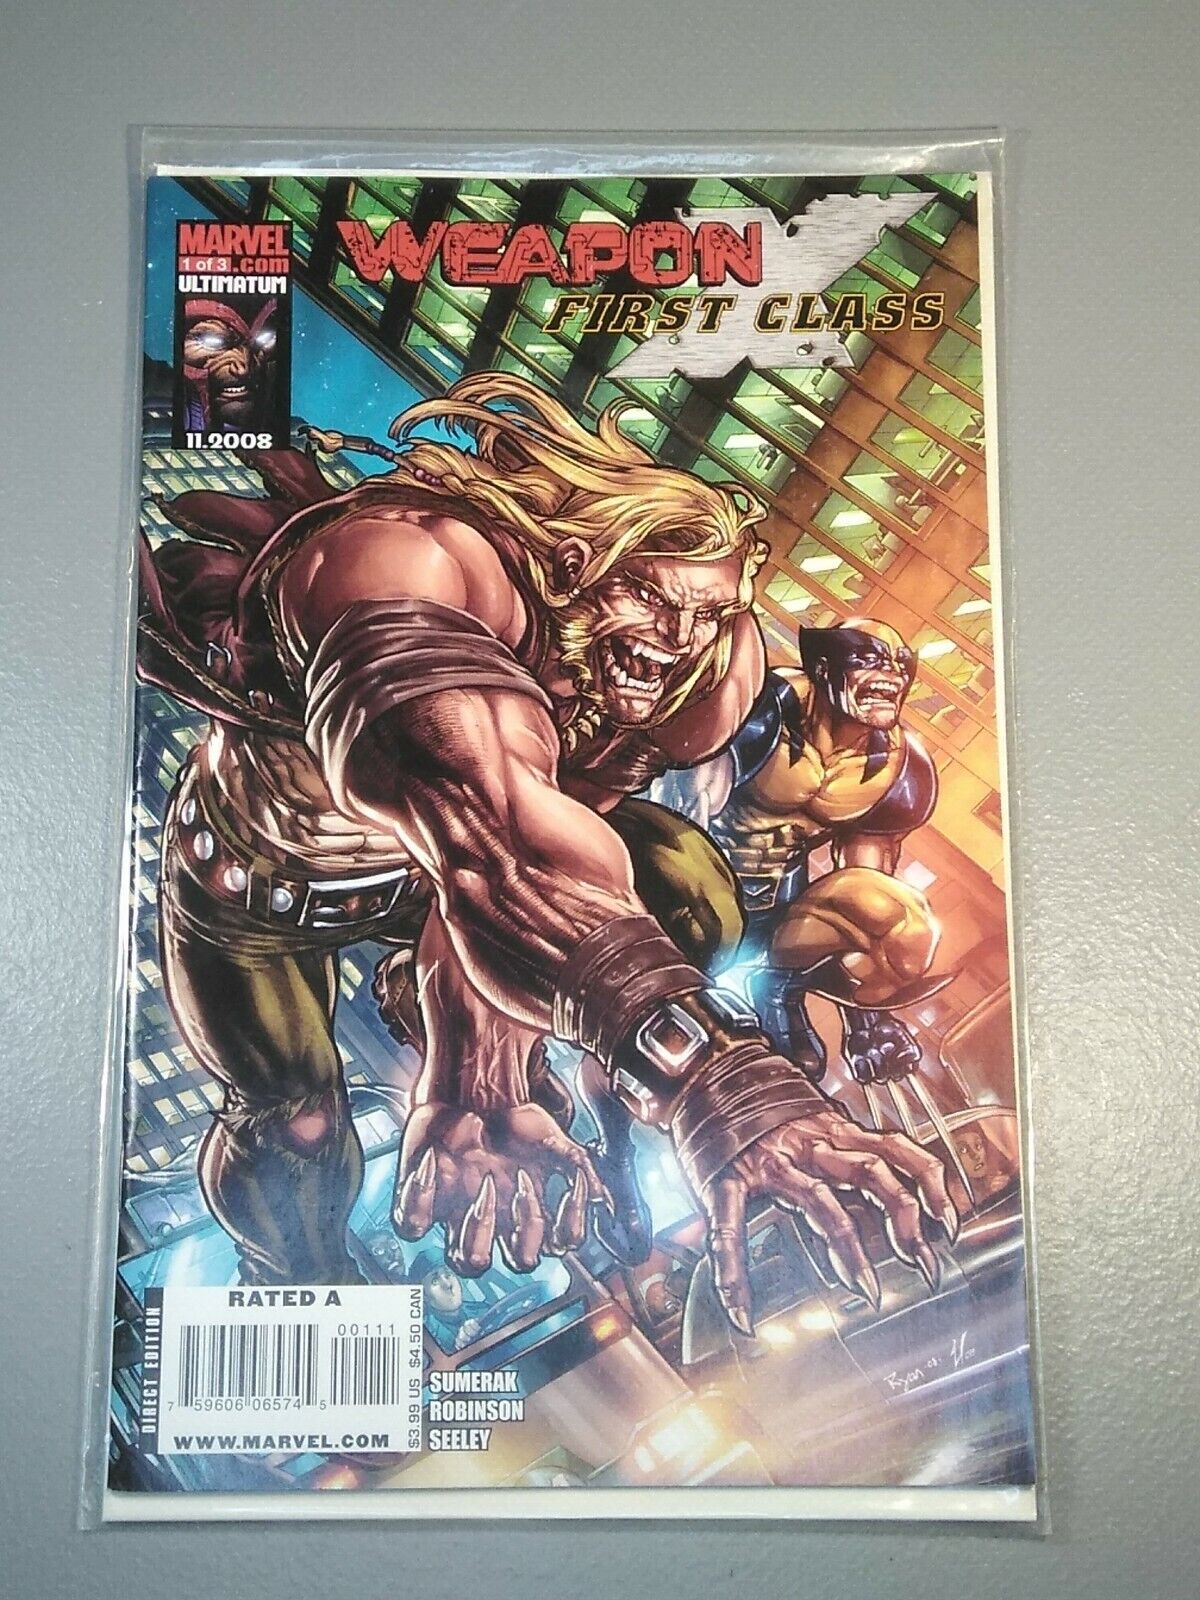 2008 Weapon X: First Class #1 Marvel Comics Wolverine NM in Plastic Sleeve